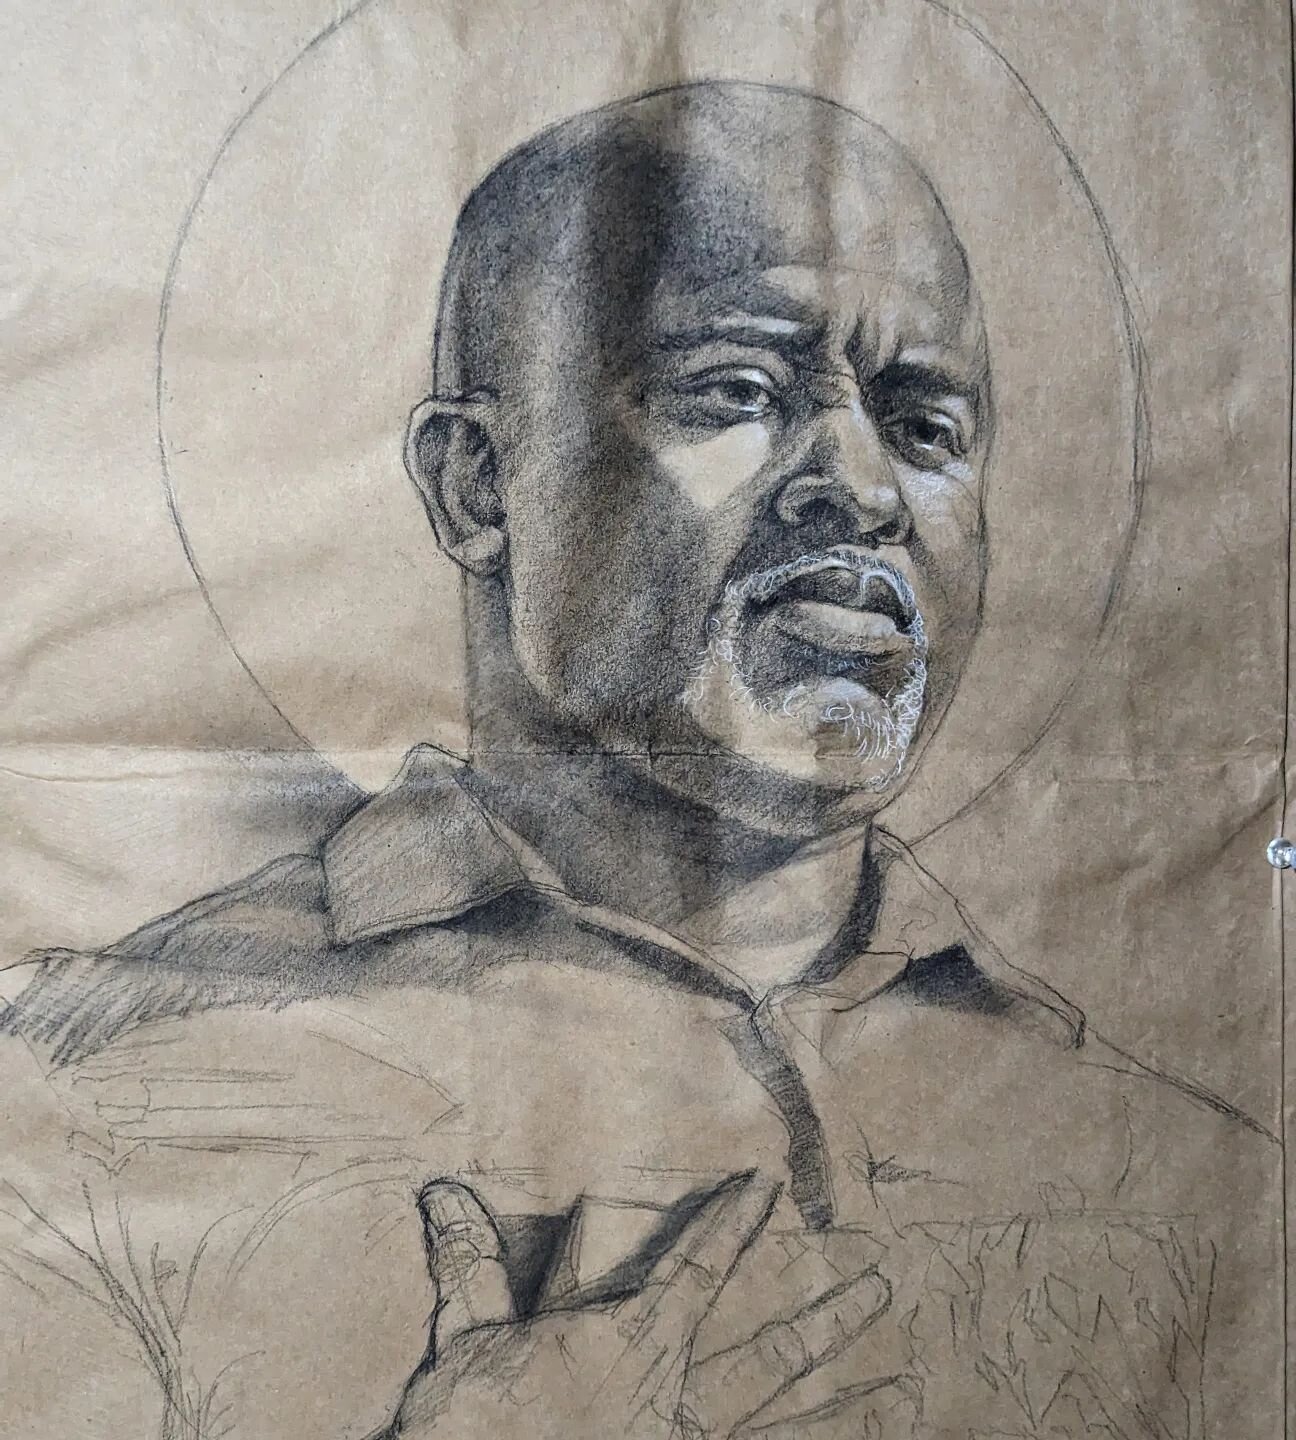 Contemplation: The Steven M. Cozart Statement
Charcoal and Pastel on Paper Bag
(Unfinished)

THIS IS MORE THAN A TEST...

Nuff Said.

#passfailseries #passfail #colorism #colorismisreal #charcoaldrawing #charcoalportrait #drawing #draw #whatisacodec 